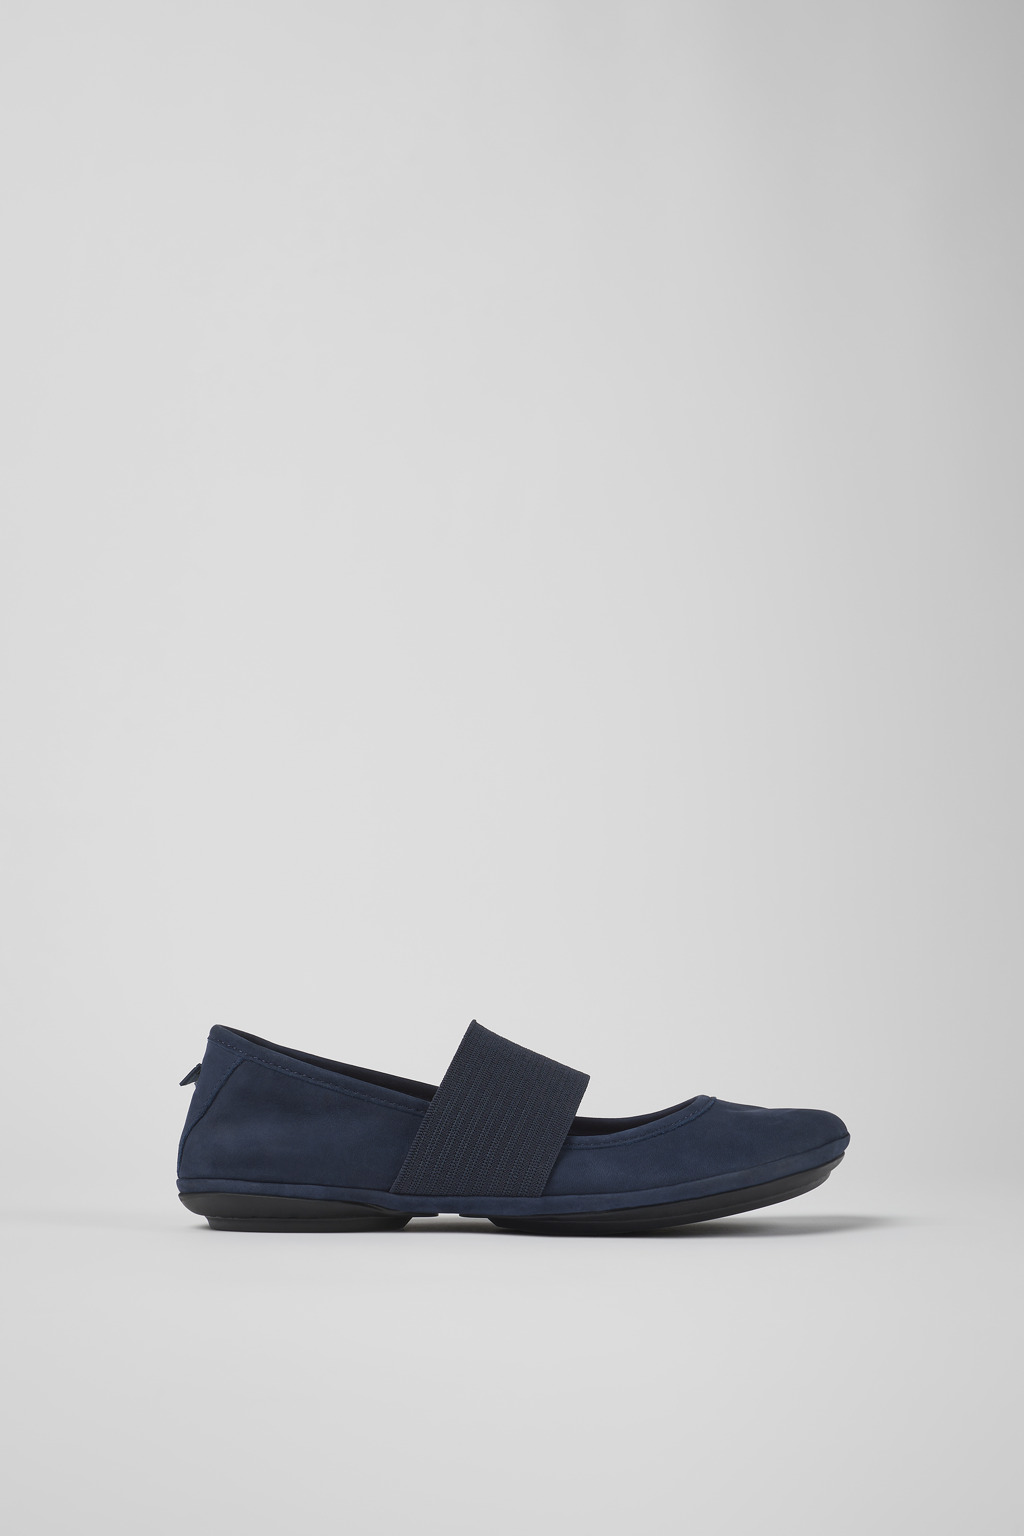 Right Blue Sandals for Women - Fall/Winter collection - Camper USA